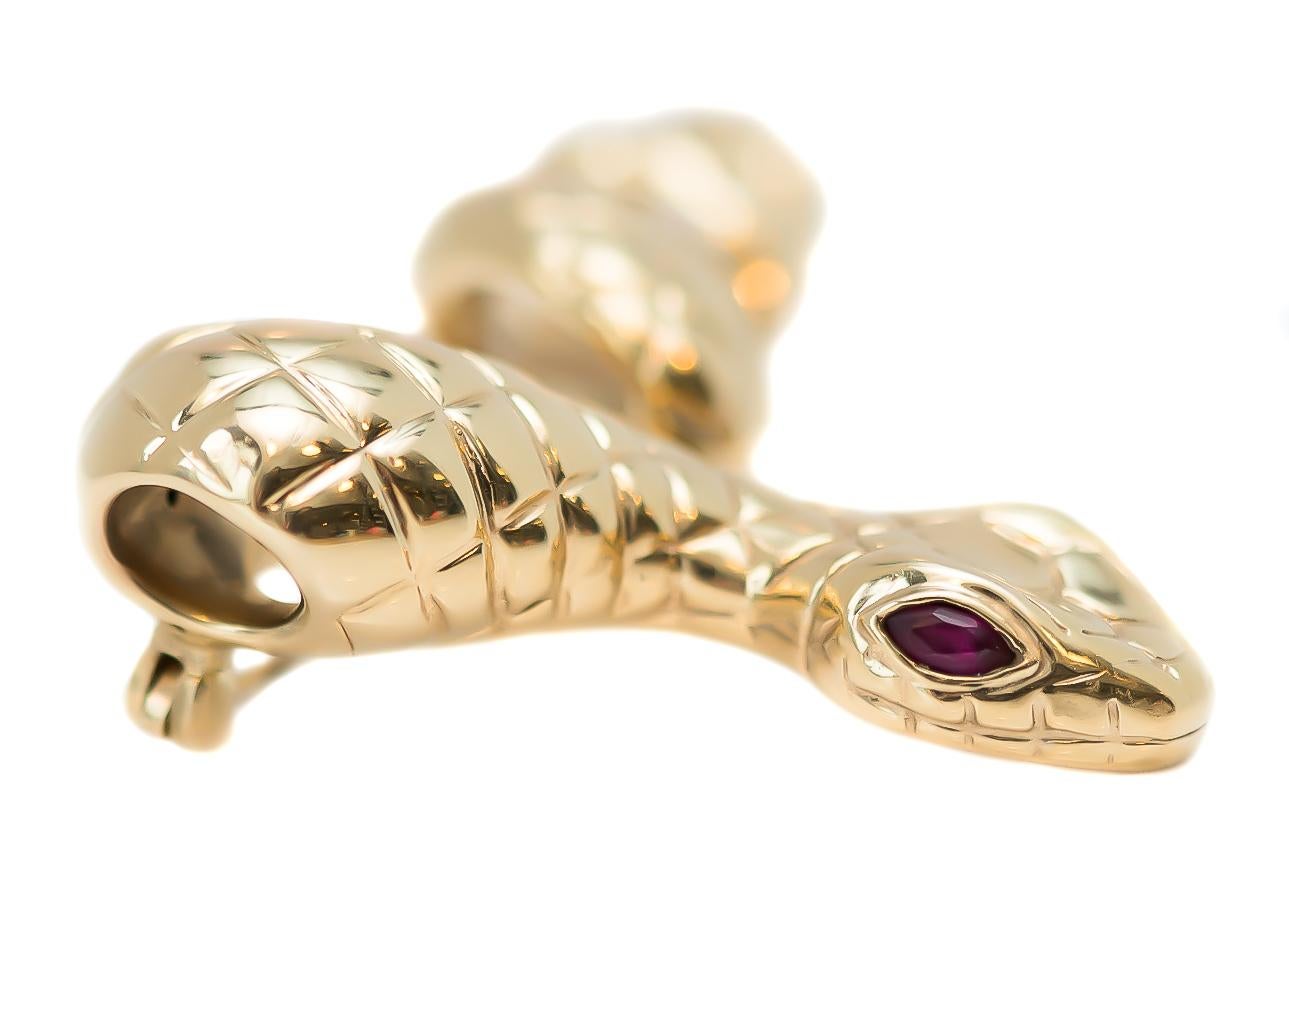 1950s Retro Serpent Brooch, Rattlesnake Pin - 14 Karat Yellow Gold, Rubies

Features:
2 Marquise cut Ruby Eyes
14 karat Yellow Gold Body
Diamond Textured Body
Rattle Texture on End of Tail
Flat, Diamond Shaped Head
Smooth Underside 
Measures 5 x 3.5